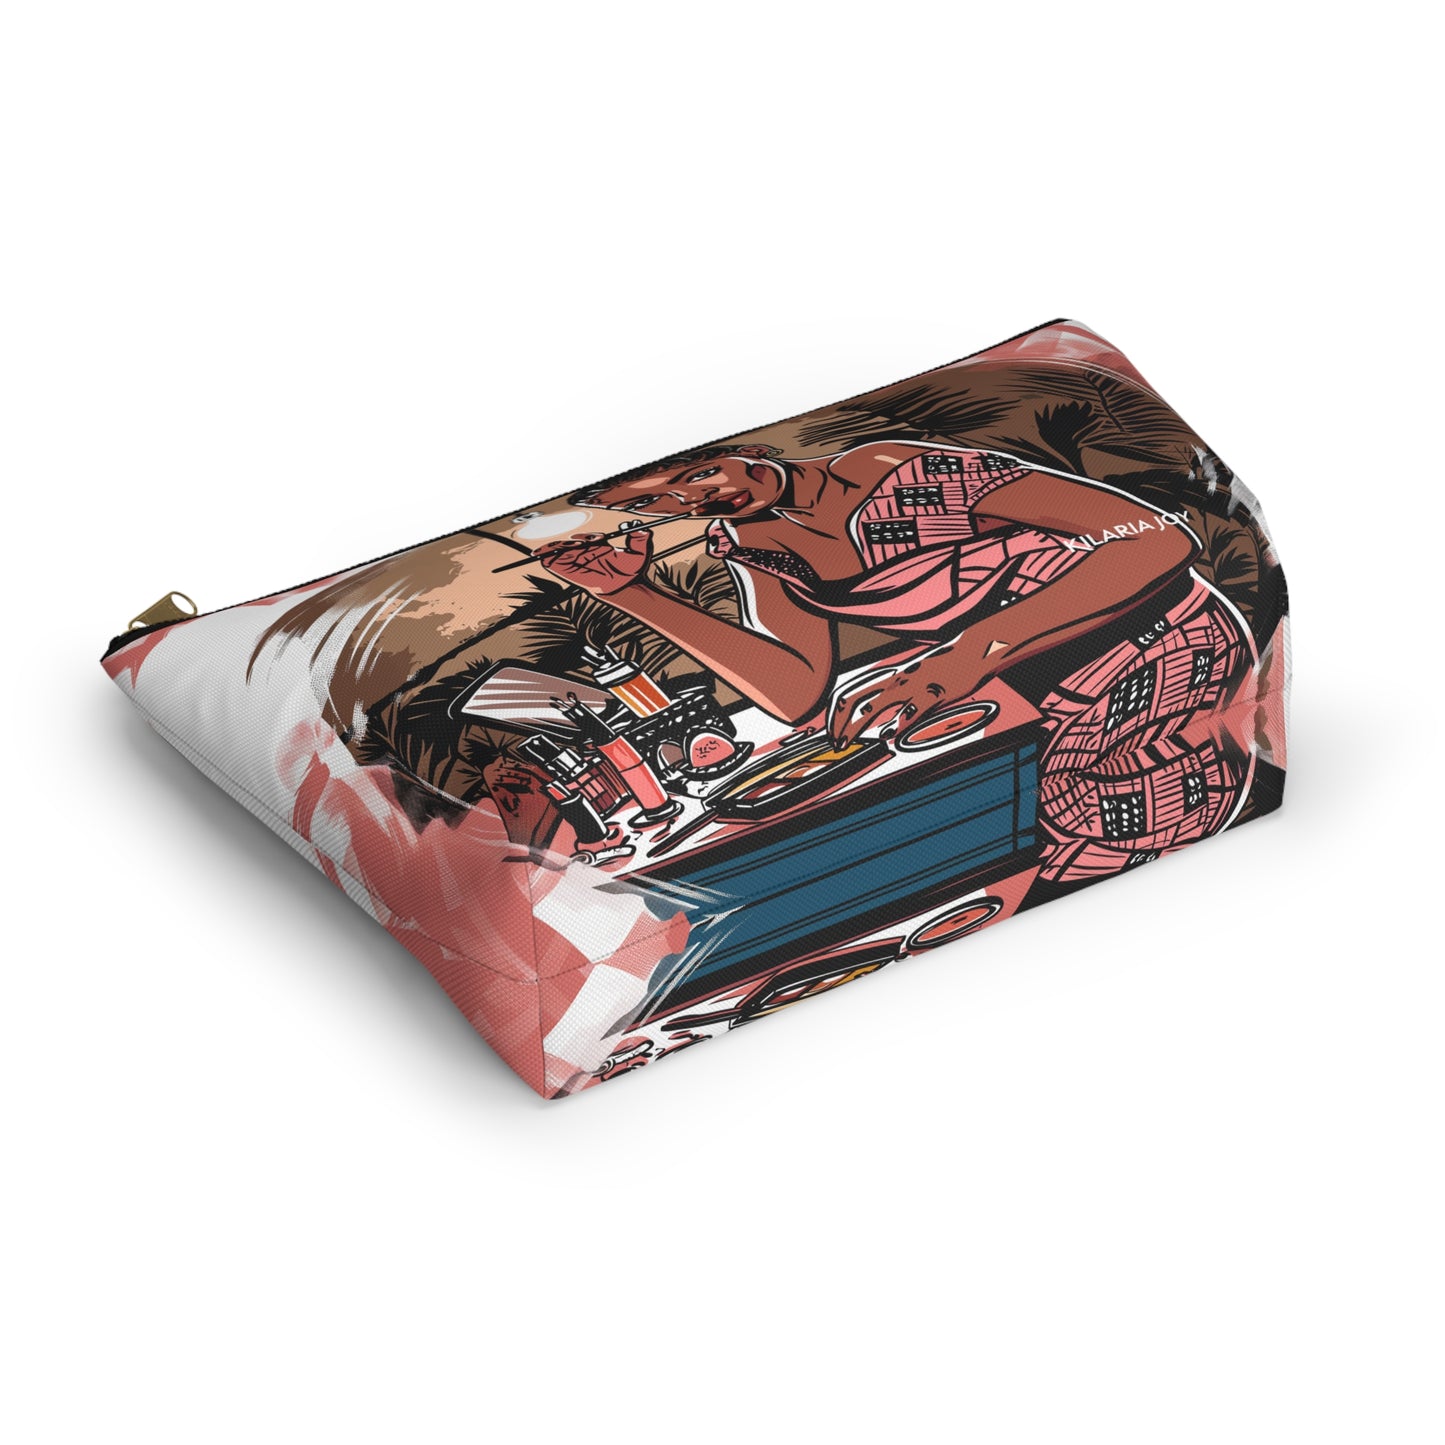 Samantha Accessory Pouch, Cosmetic & Toiletry Bag, Travel Bag